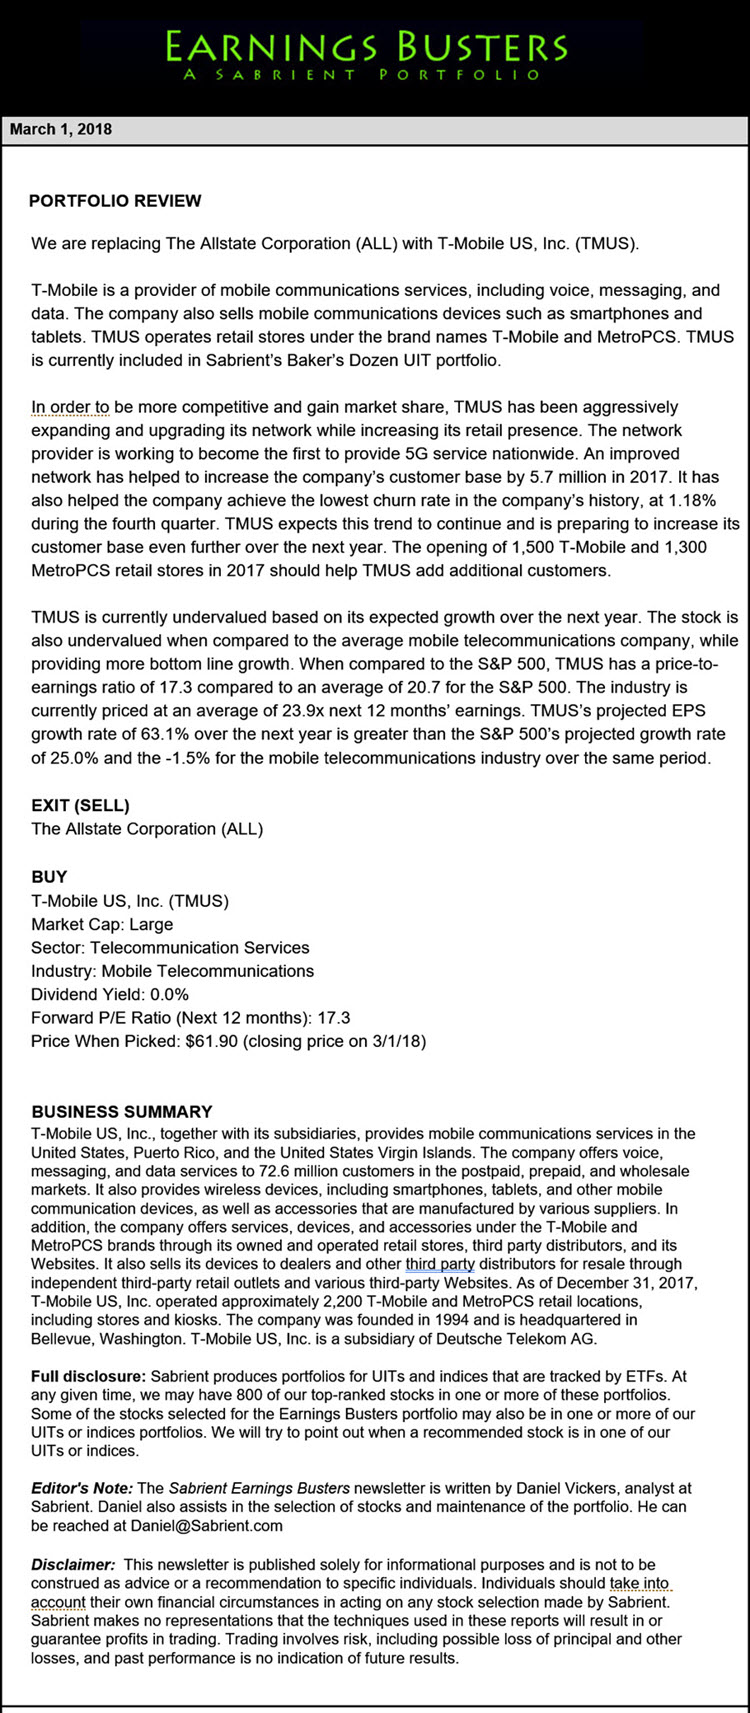 Earnings Busters Newsletter - March 1, 2018